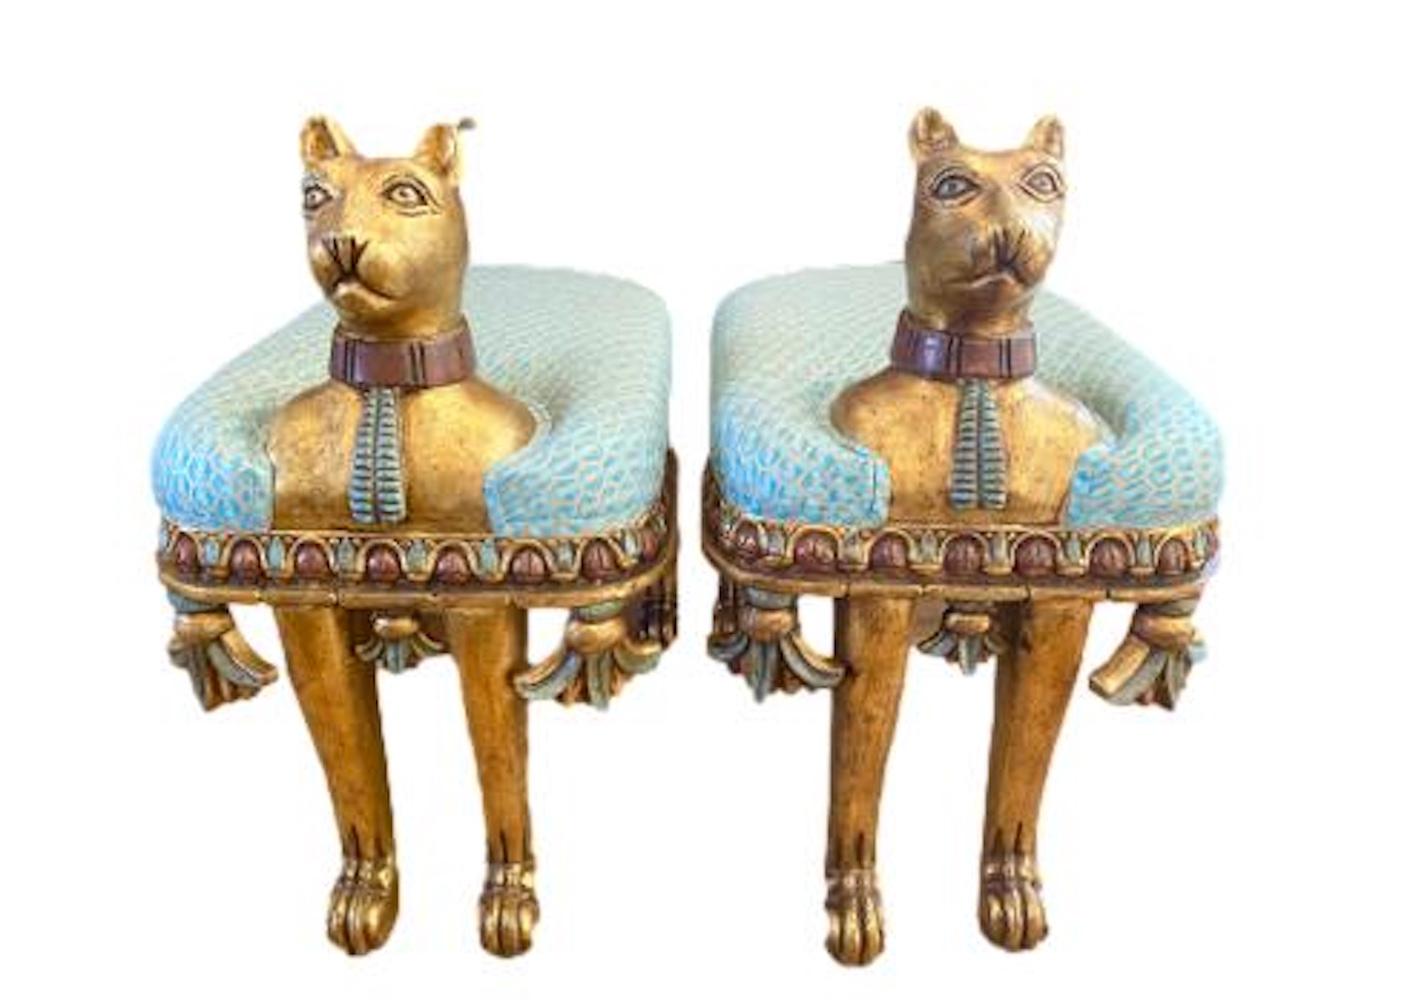 Unique pair of Egyptian Revival cat benches newly upholstered in Venetian, Fortuny fabric. Carved wood is gilt and painted.